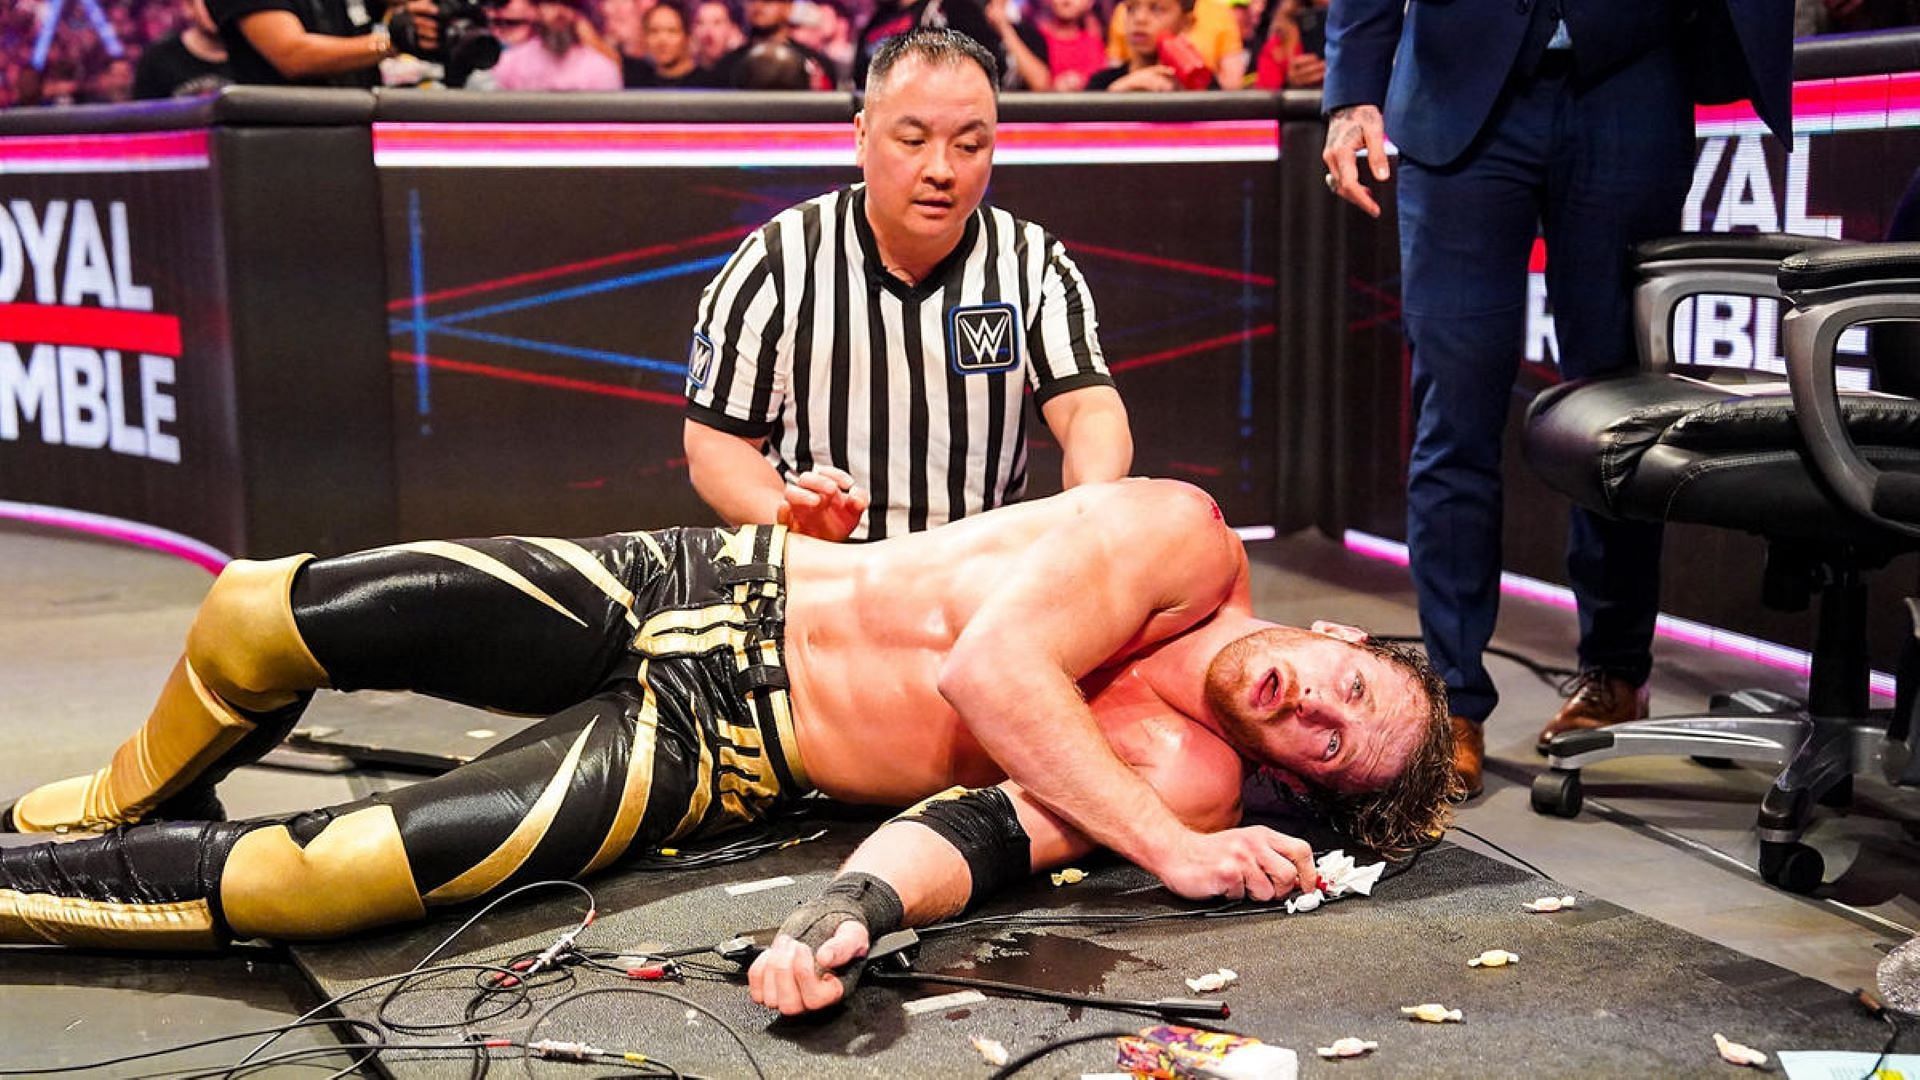 The Maverick had all he could handle at the Royal Rumble against Kevin Owens.